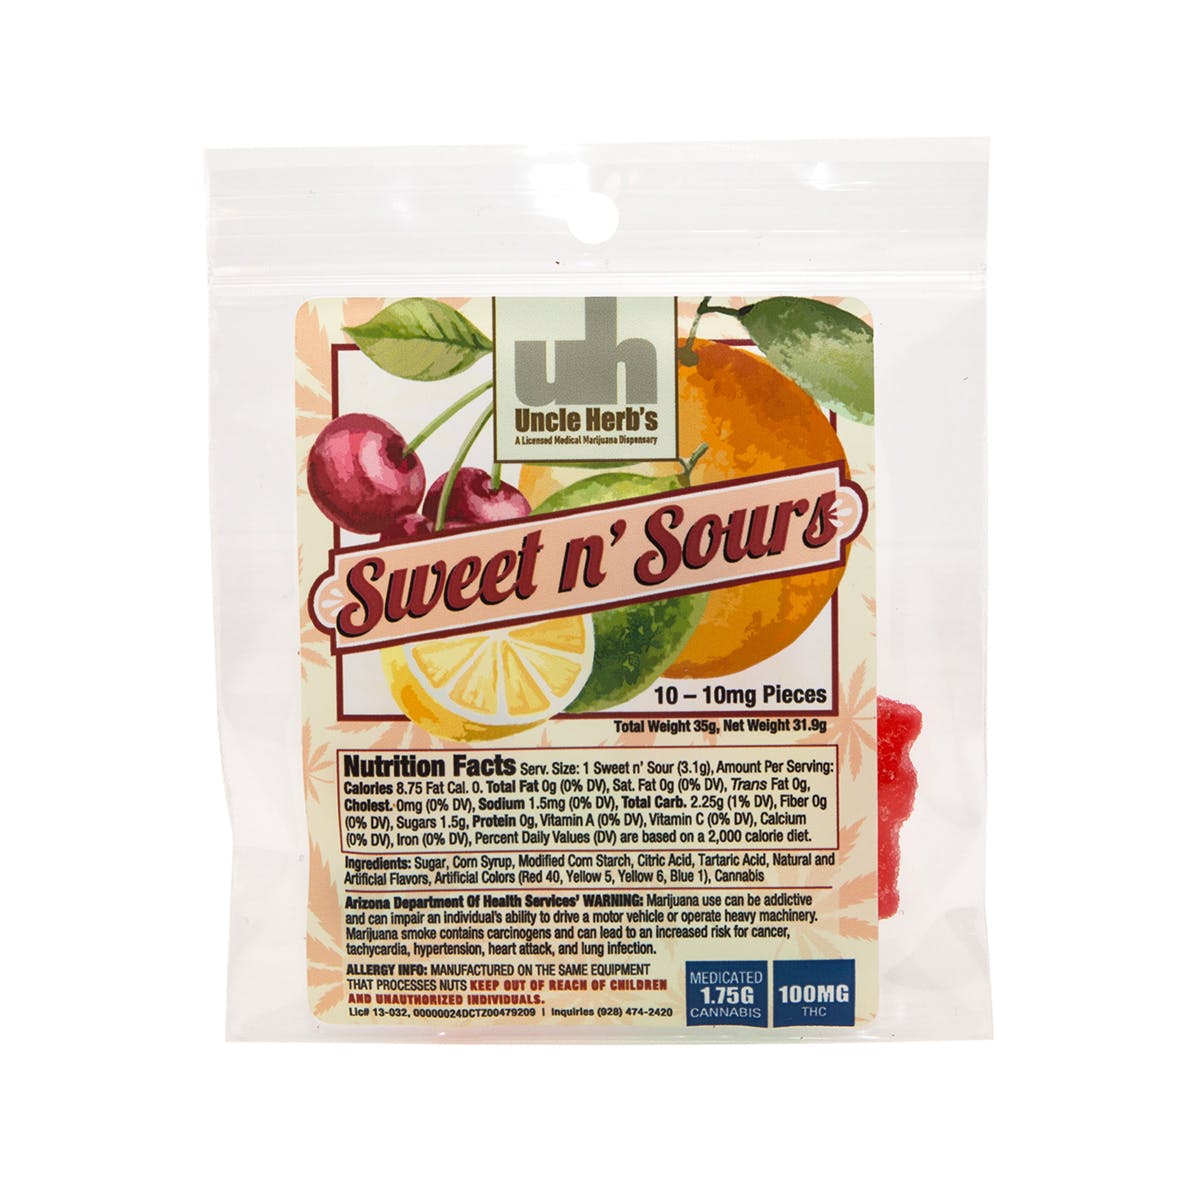 Sweet and Sours 100mg